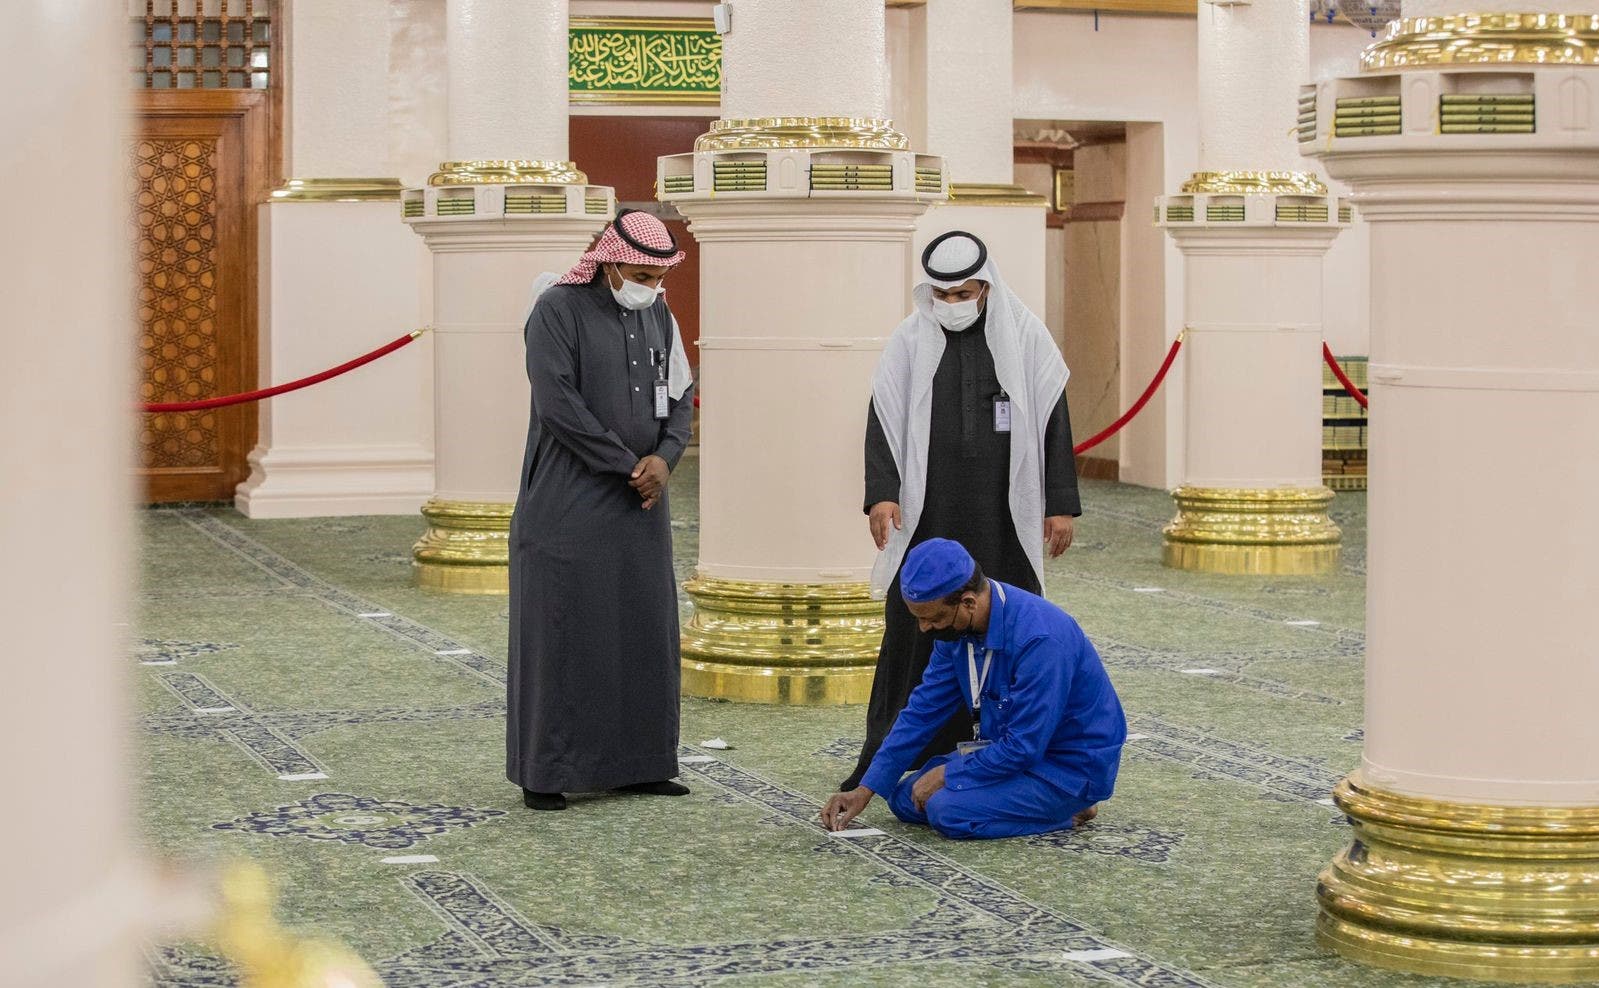 Putting spacing stickers inside the Prophet's Mosque